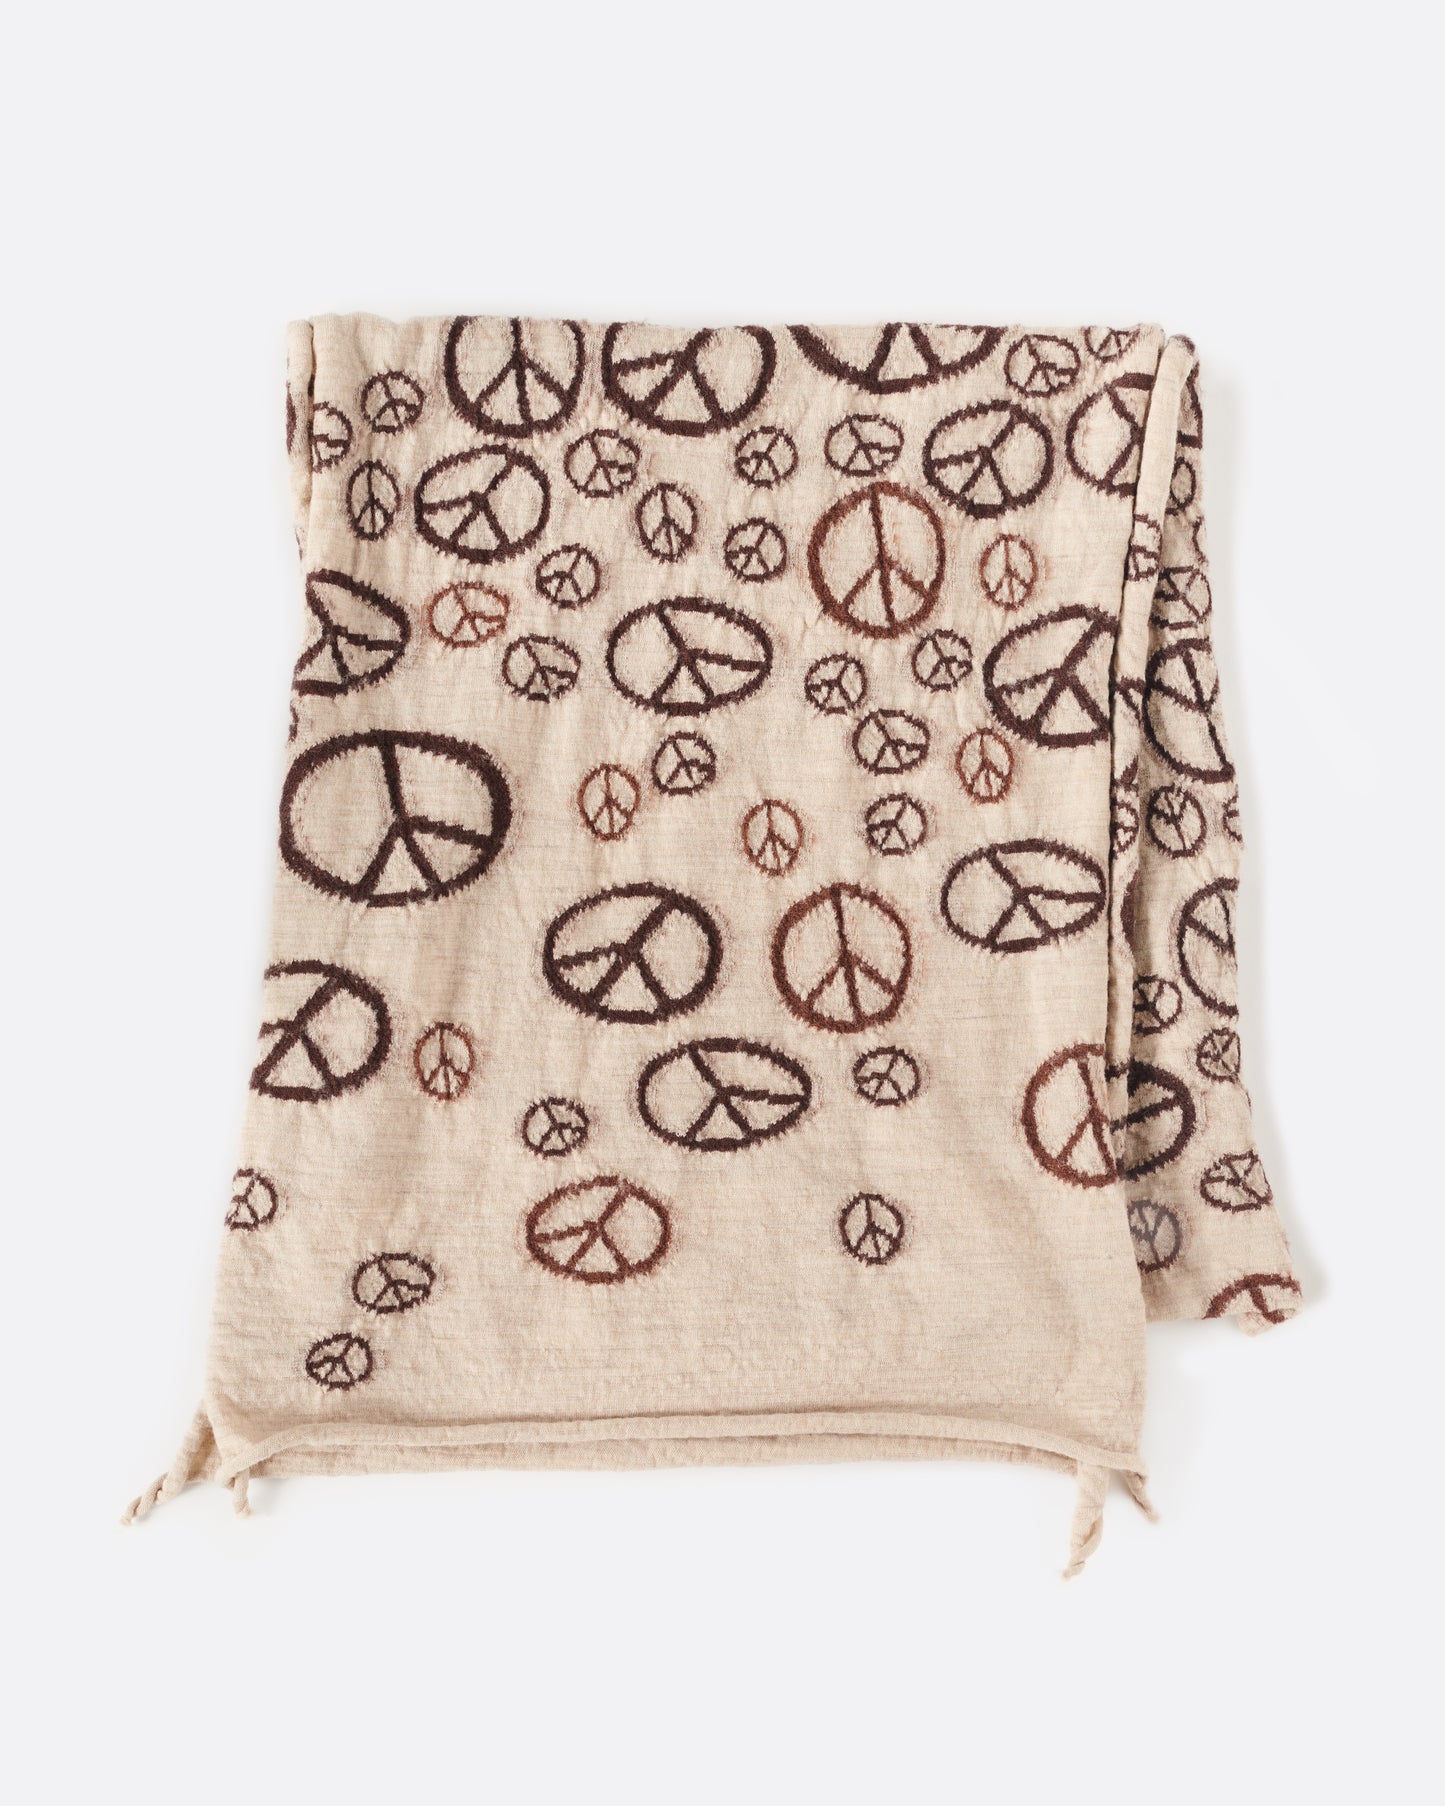 A compressed wool scarf covered in a collage of peace signs.